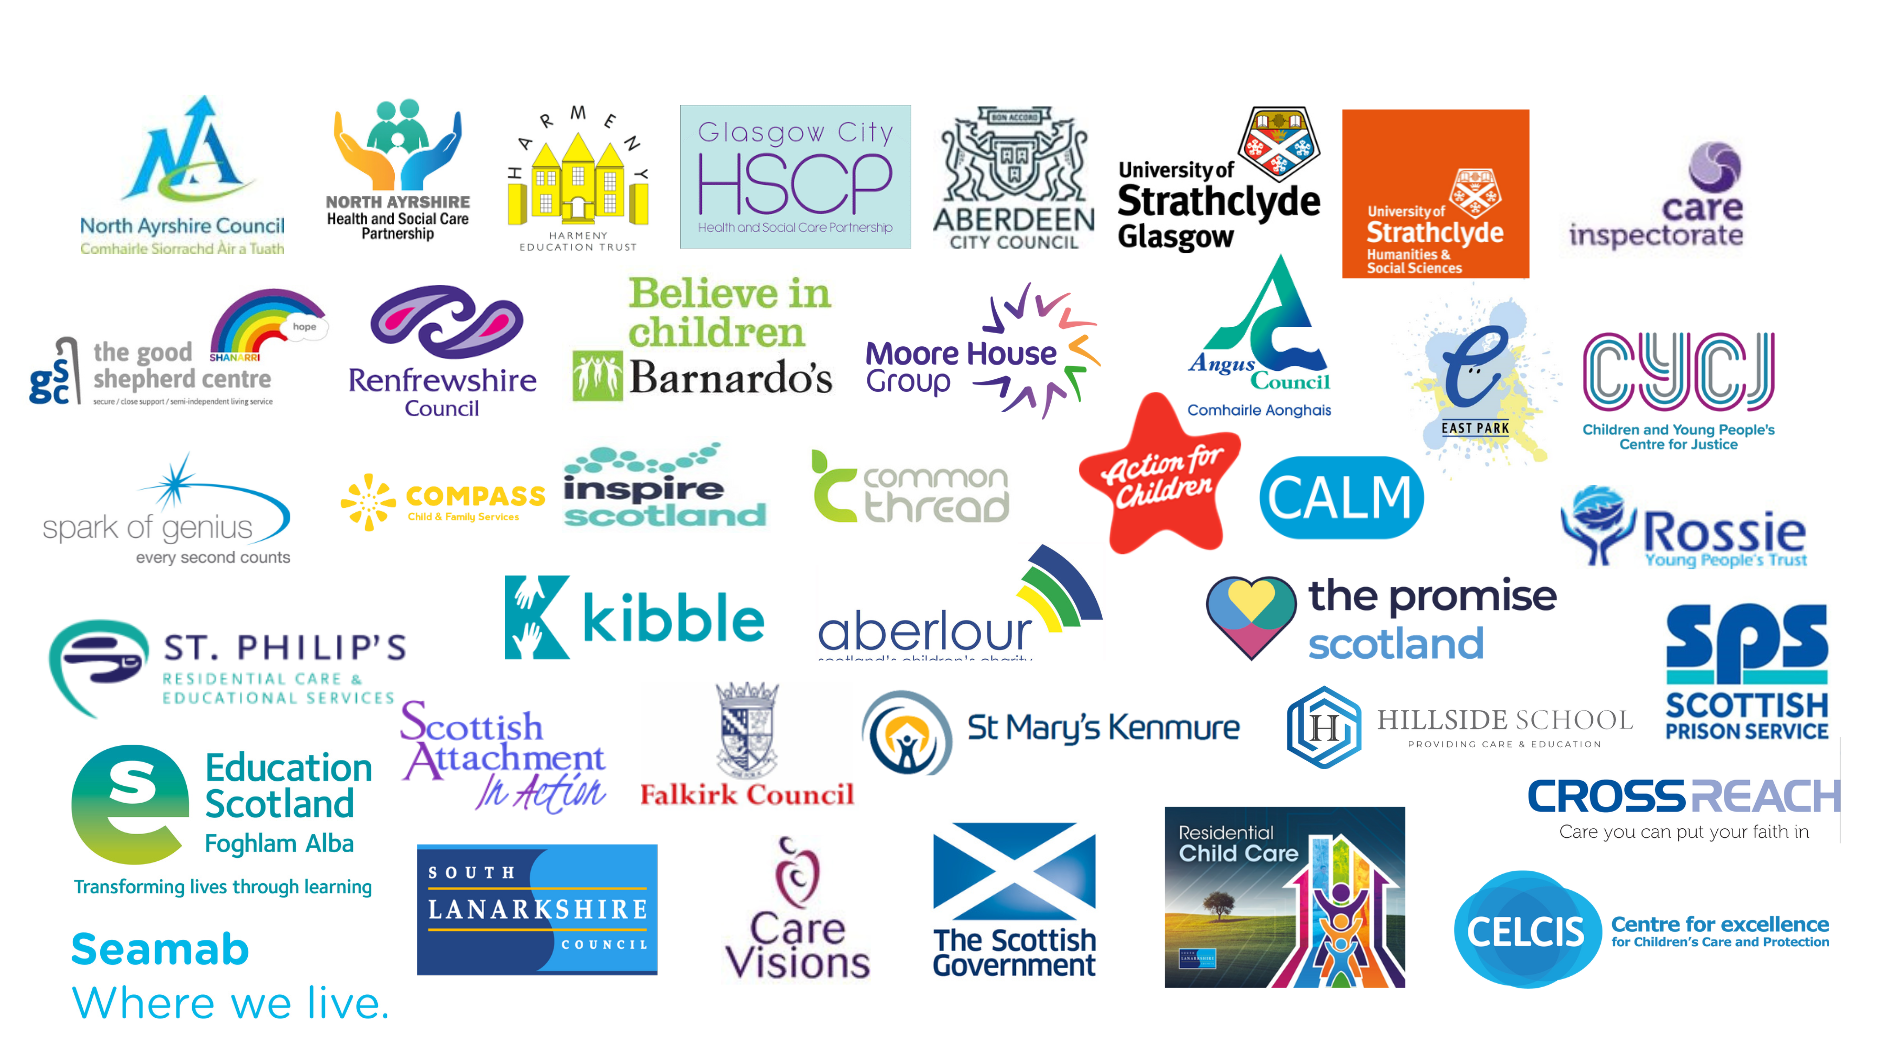 The logos of the organisations who are supporting the Scottish Physical Restraint Action Group